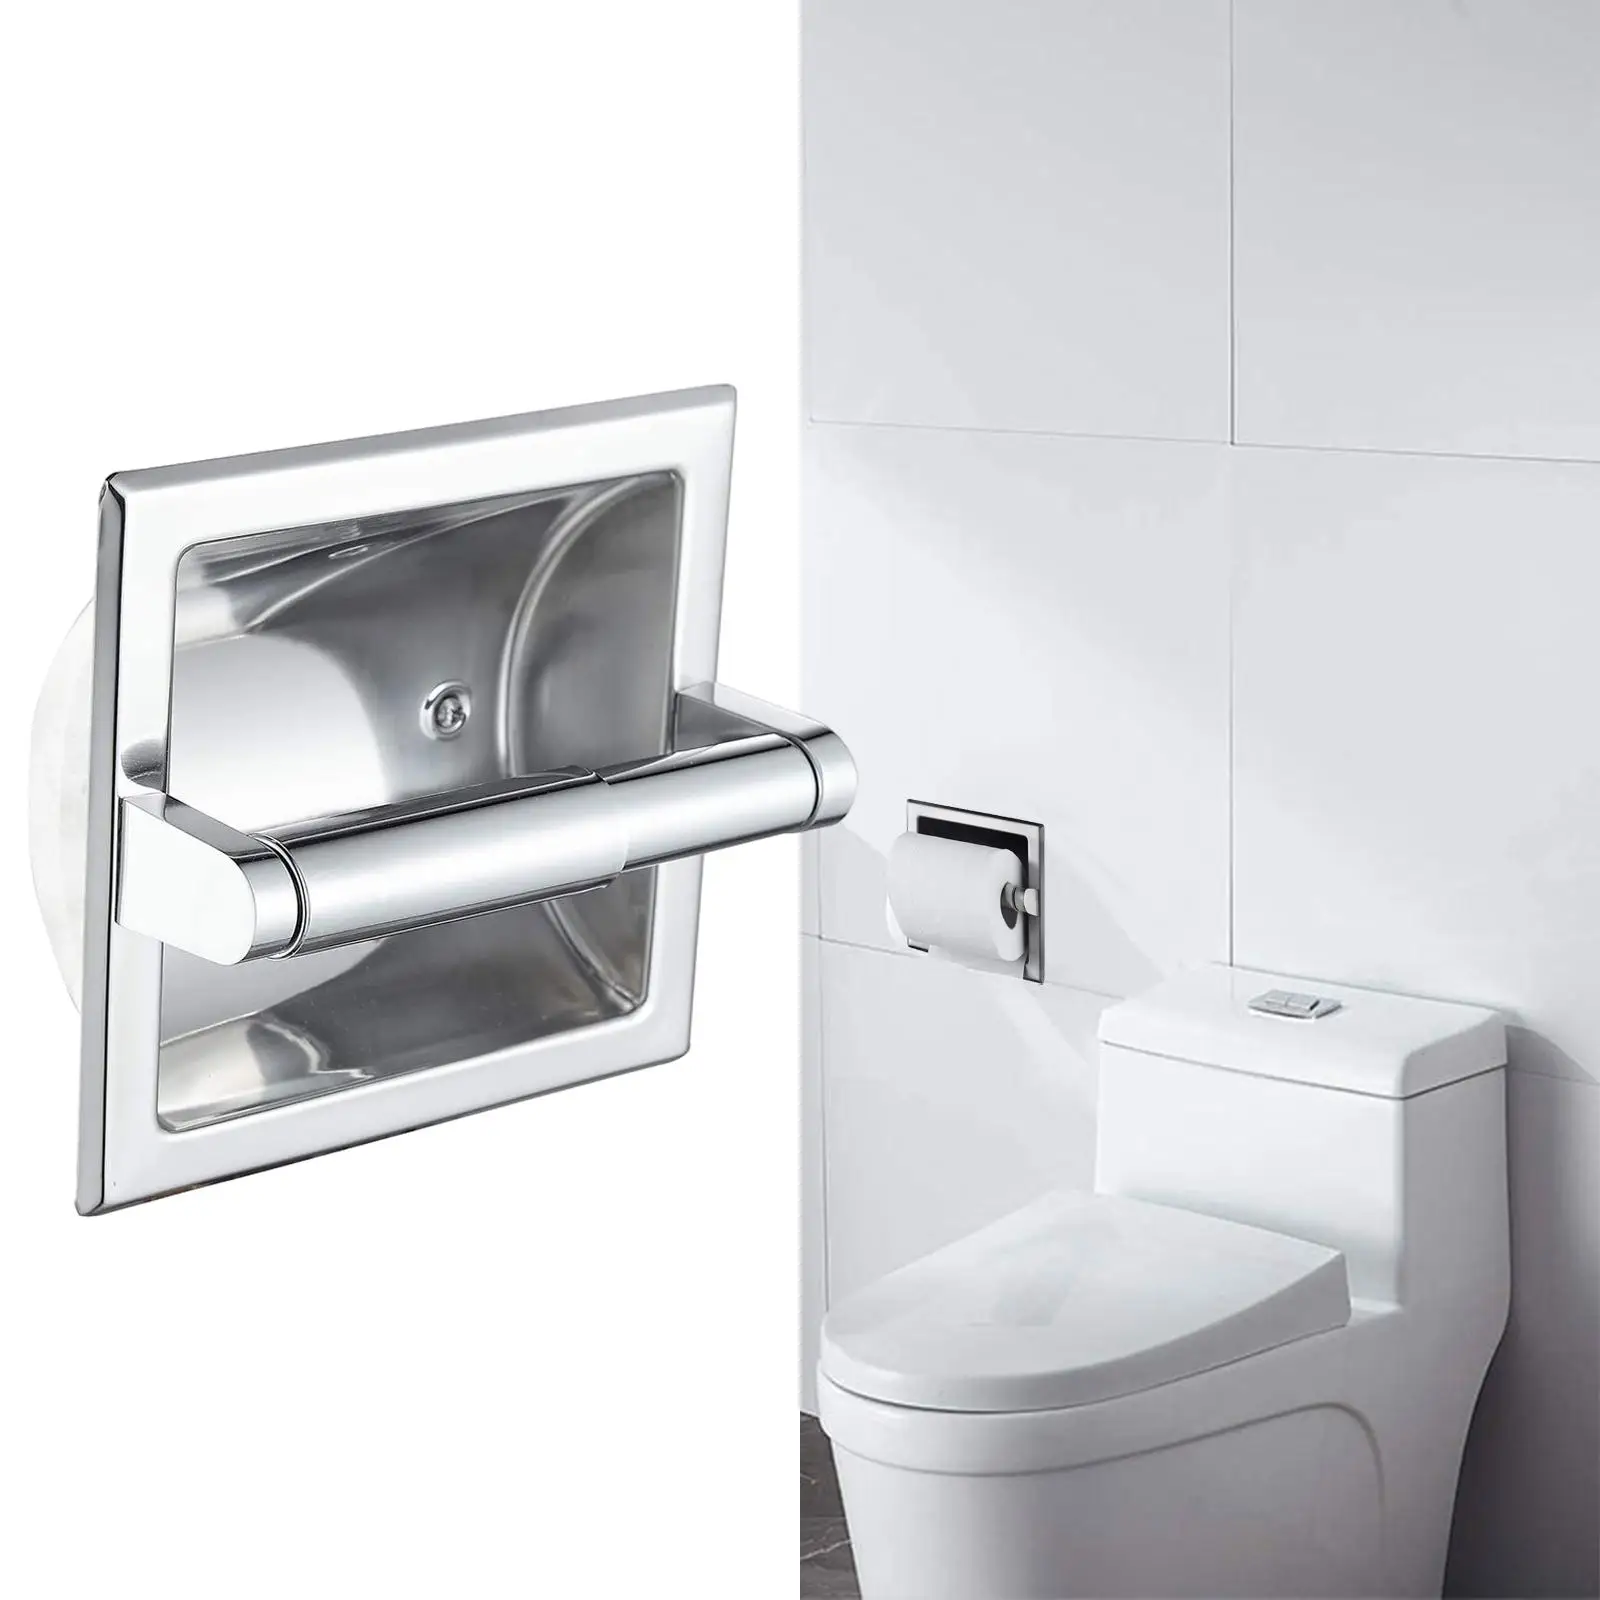 Stainless Steel Toilet Paper Holder Toilet Paper Stand -Wipe Paper Storage